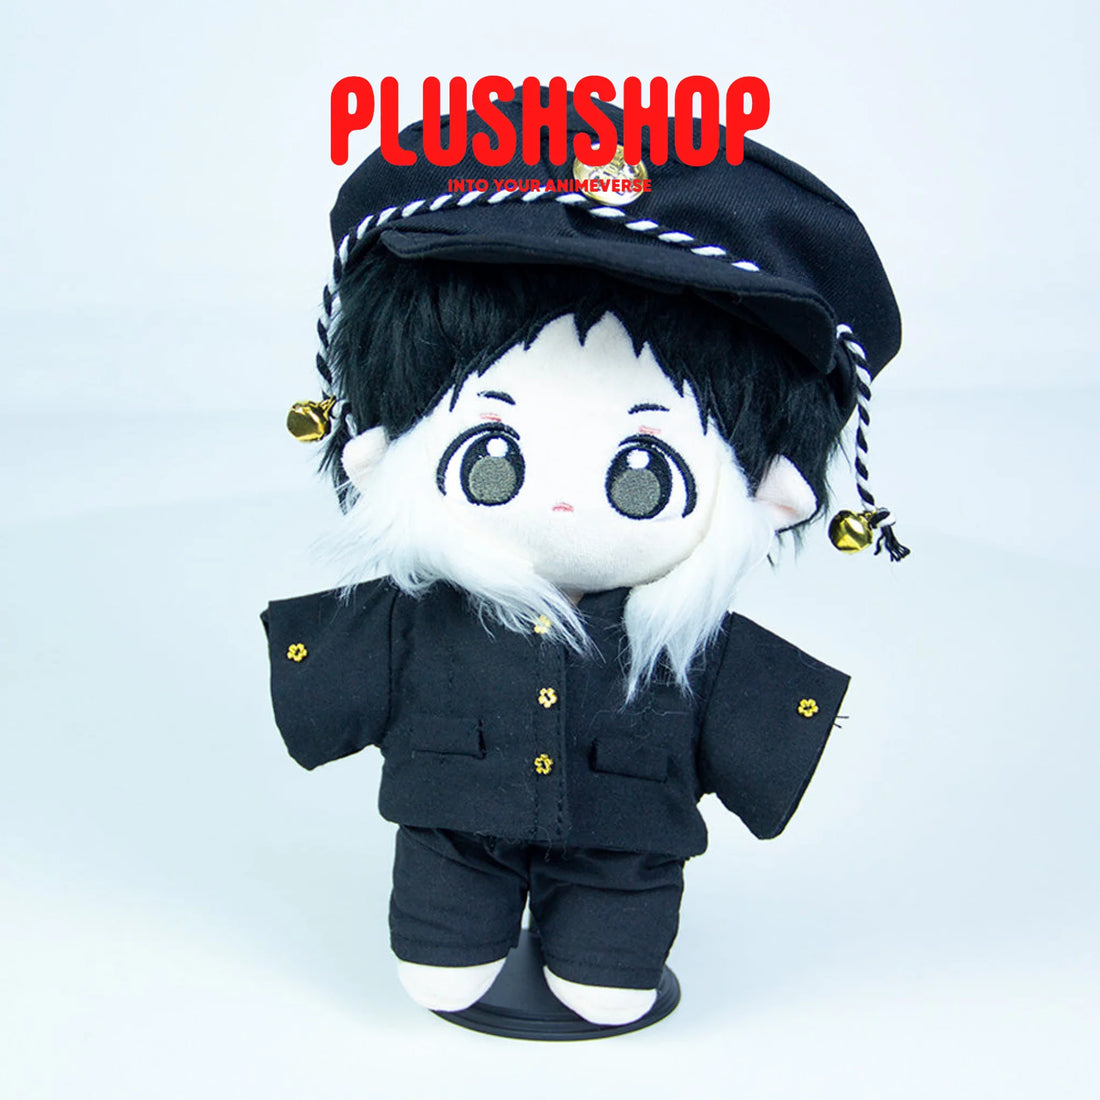 Cotton Doll Plush Clothes Fashionable College Style For Dolls 20Cm 娃衣